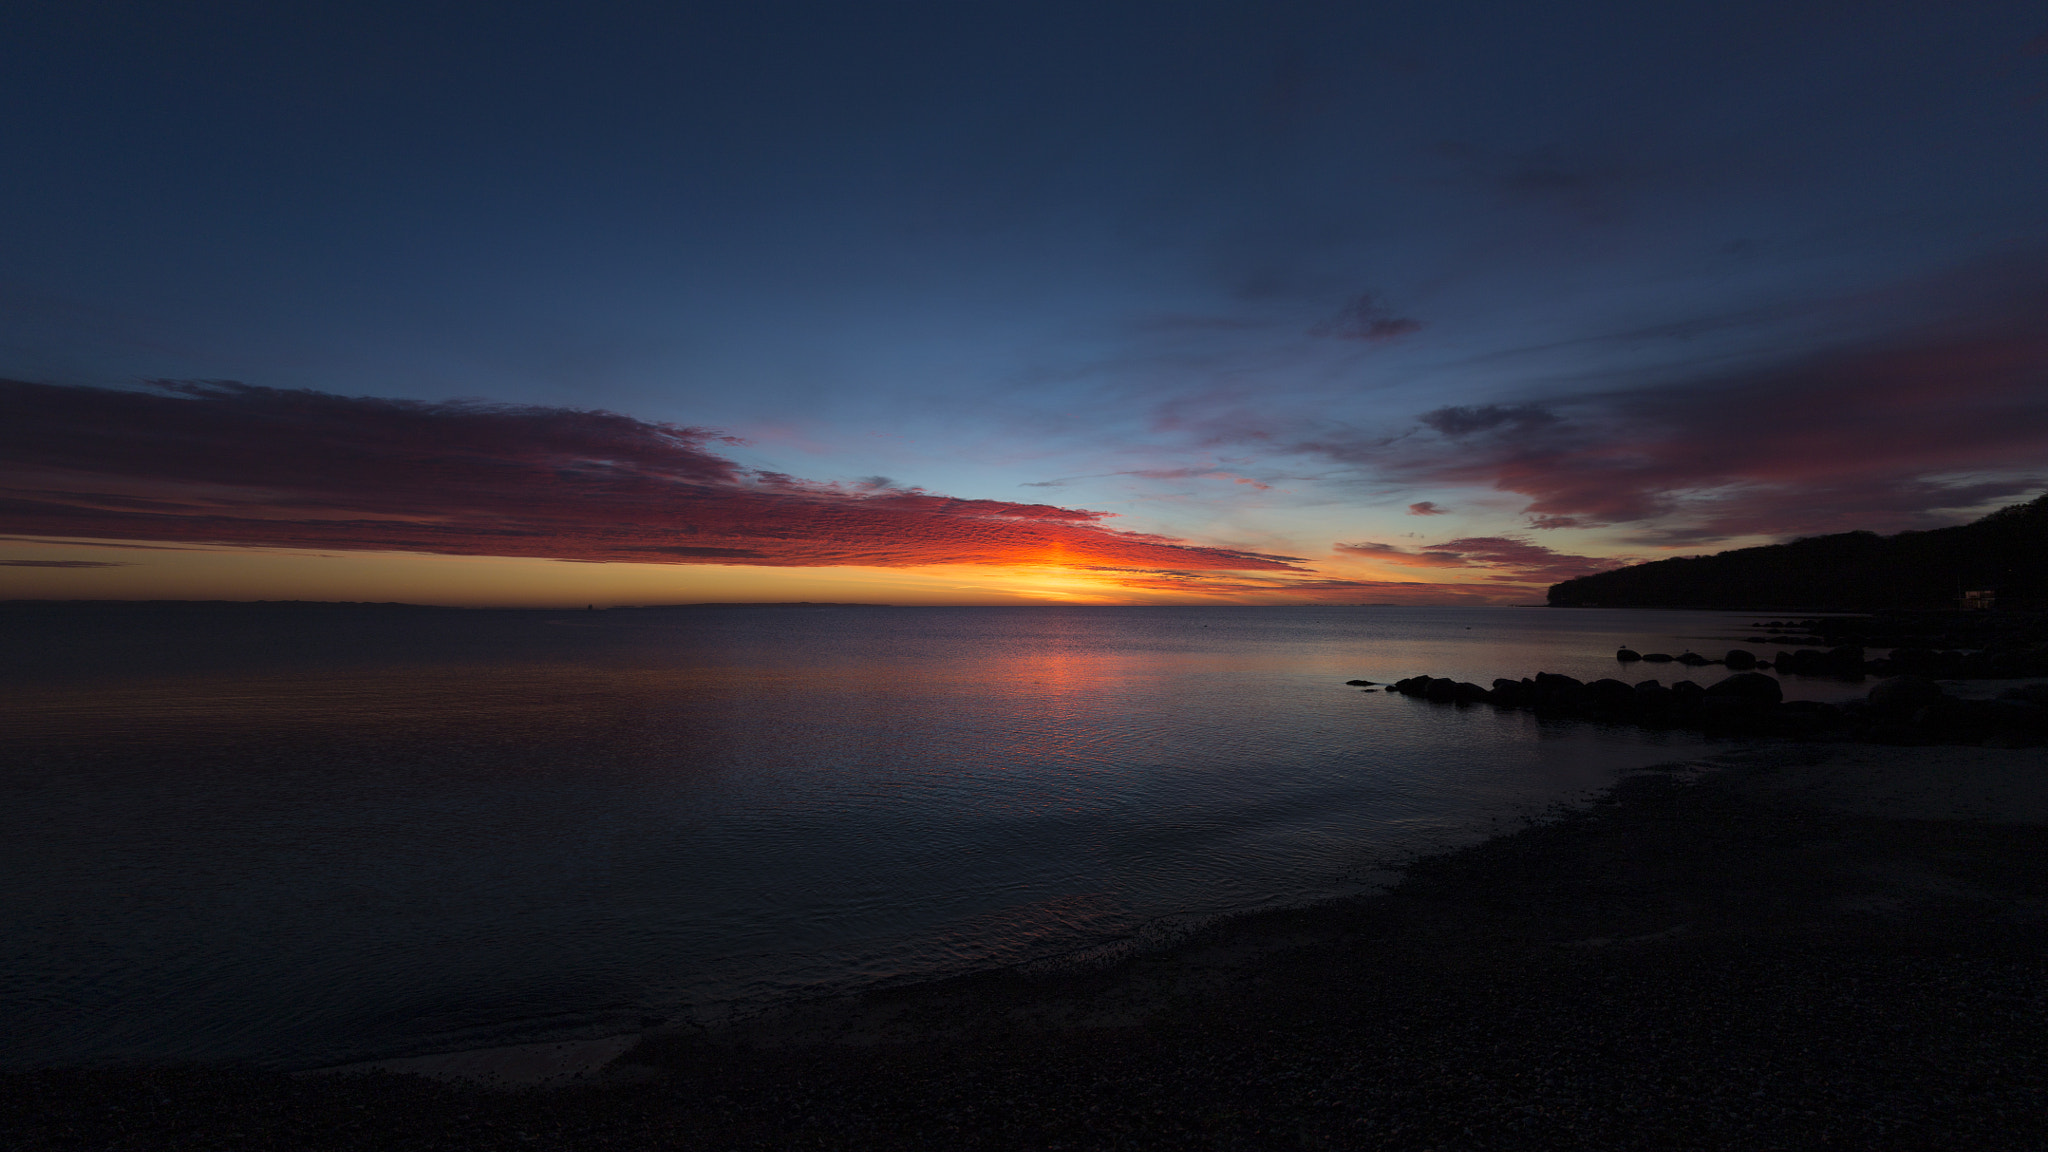 Canon EOS-1D X + Sigma 24-105mm f/4 DG OS HSM | A sample photo. Sunrise over the bay photography